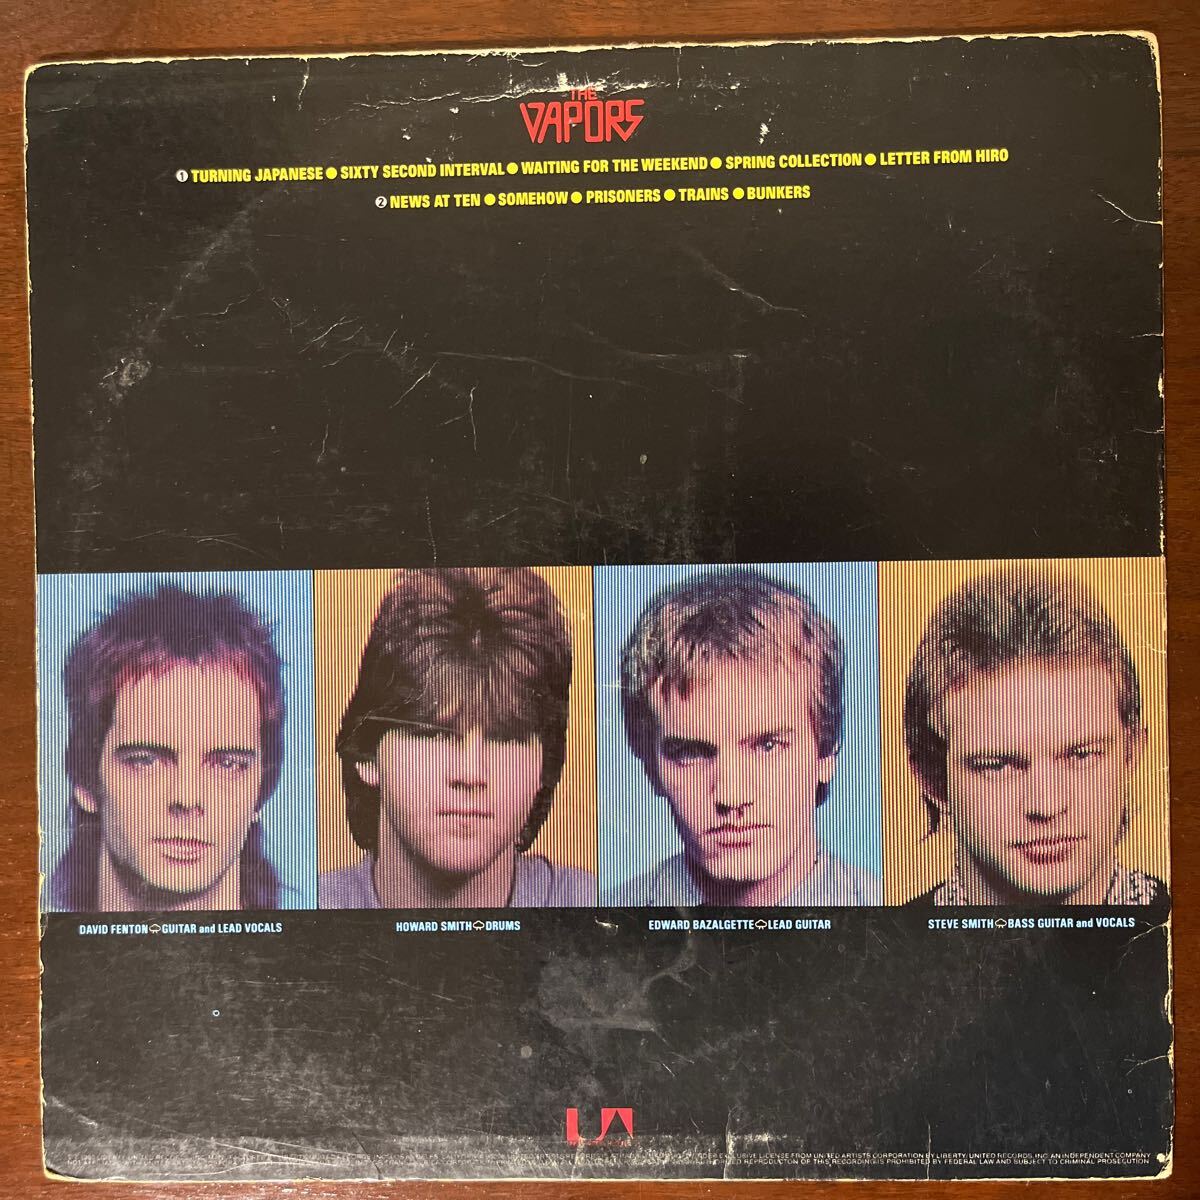 【LP】The Vapors / New Clear Days United Artists Records LT-1049 US Orig 1980 検) New Wave Power Pop Punk パンク天国_画像2